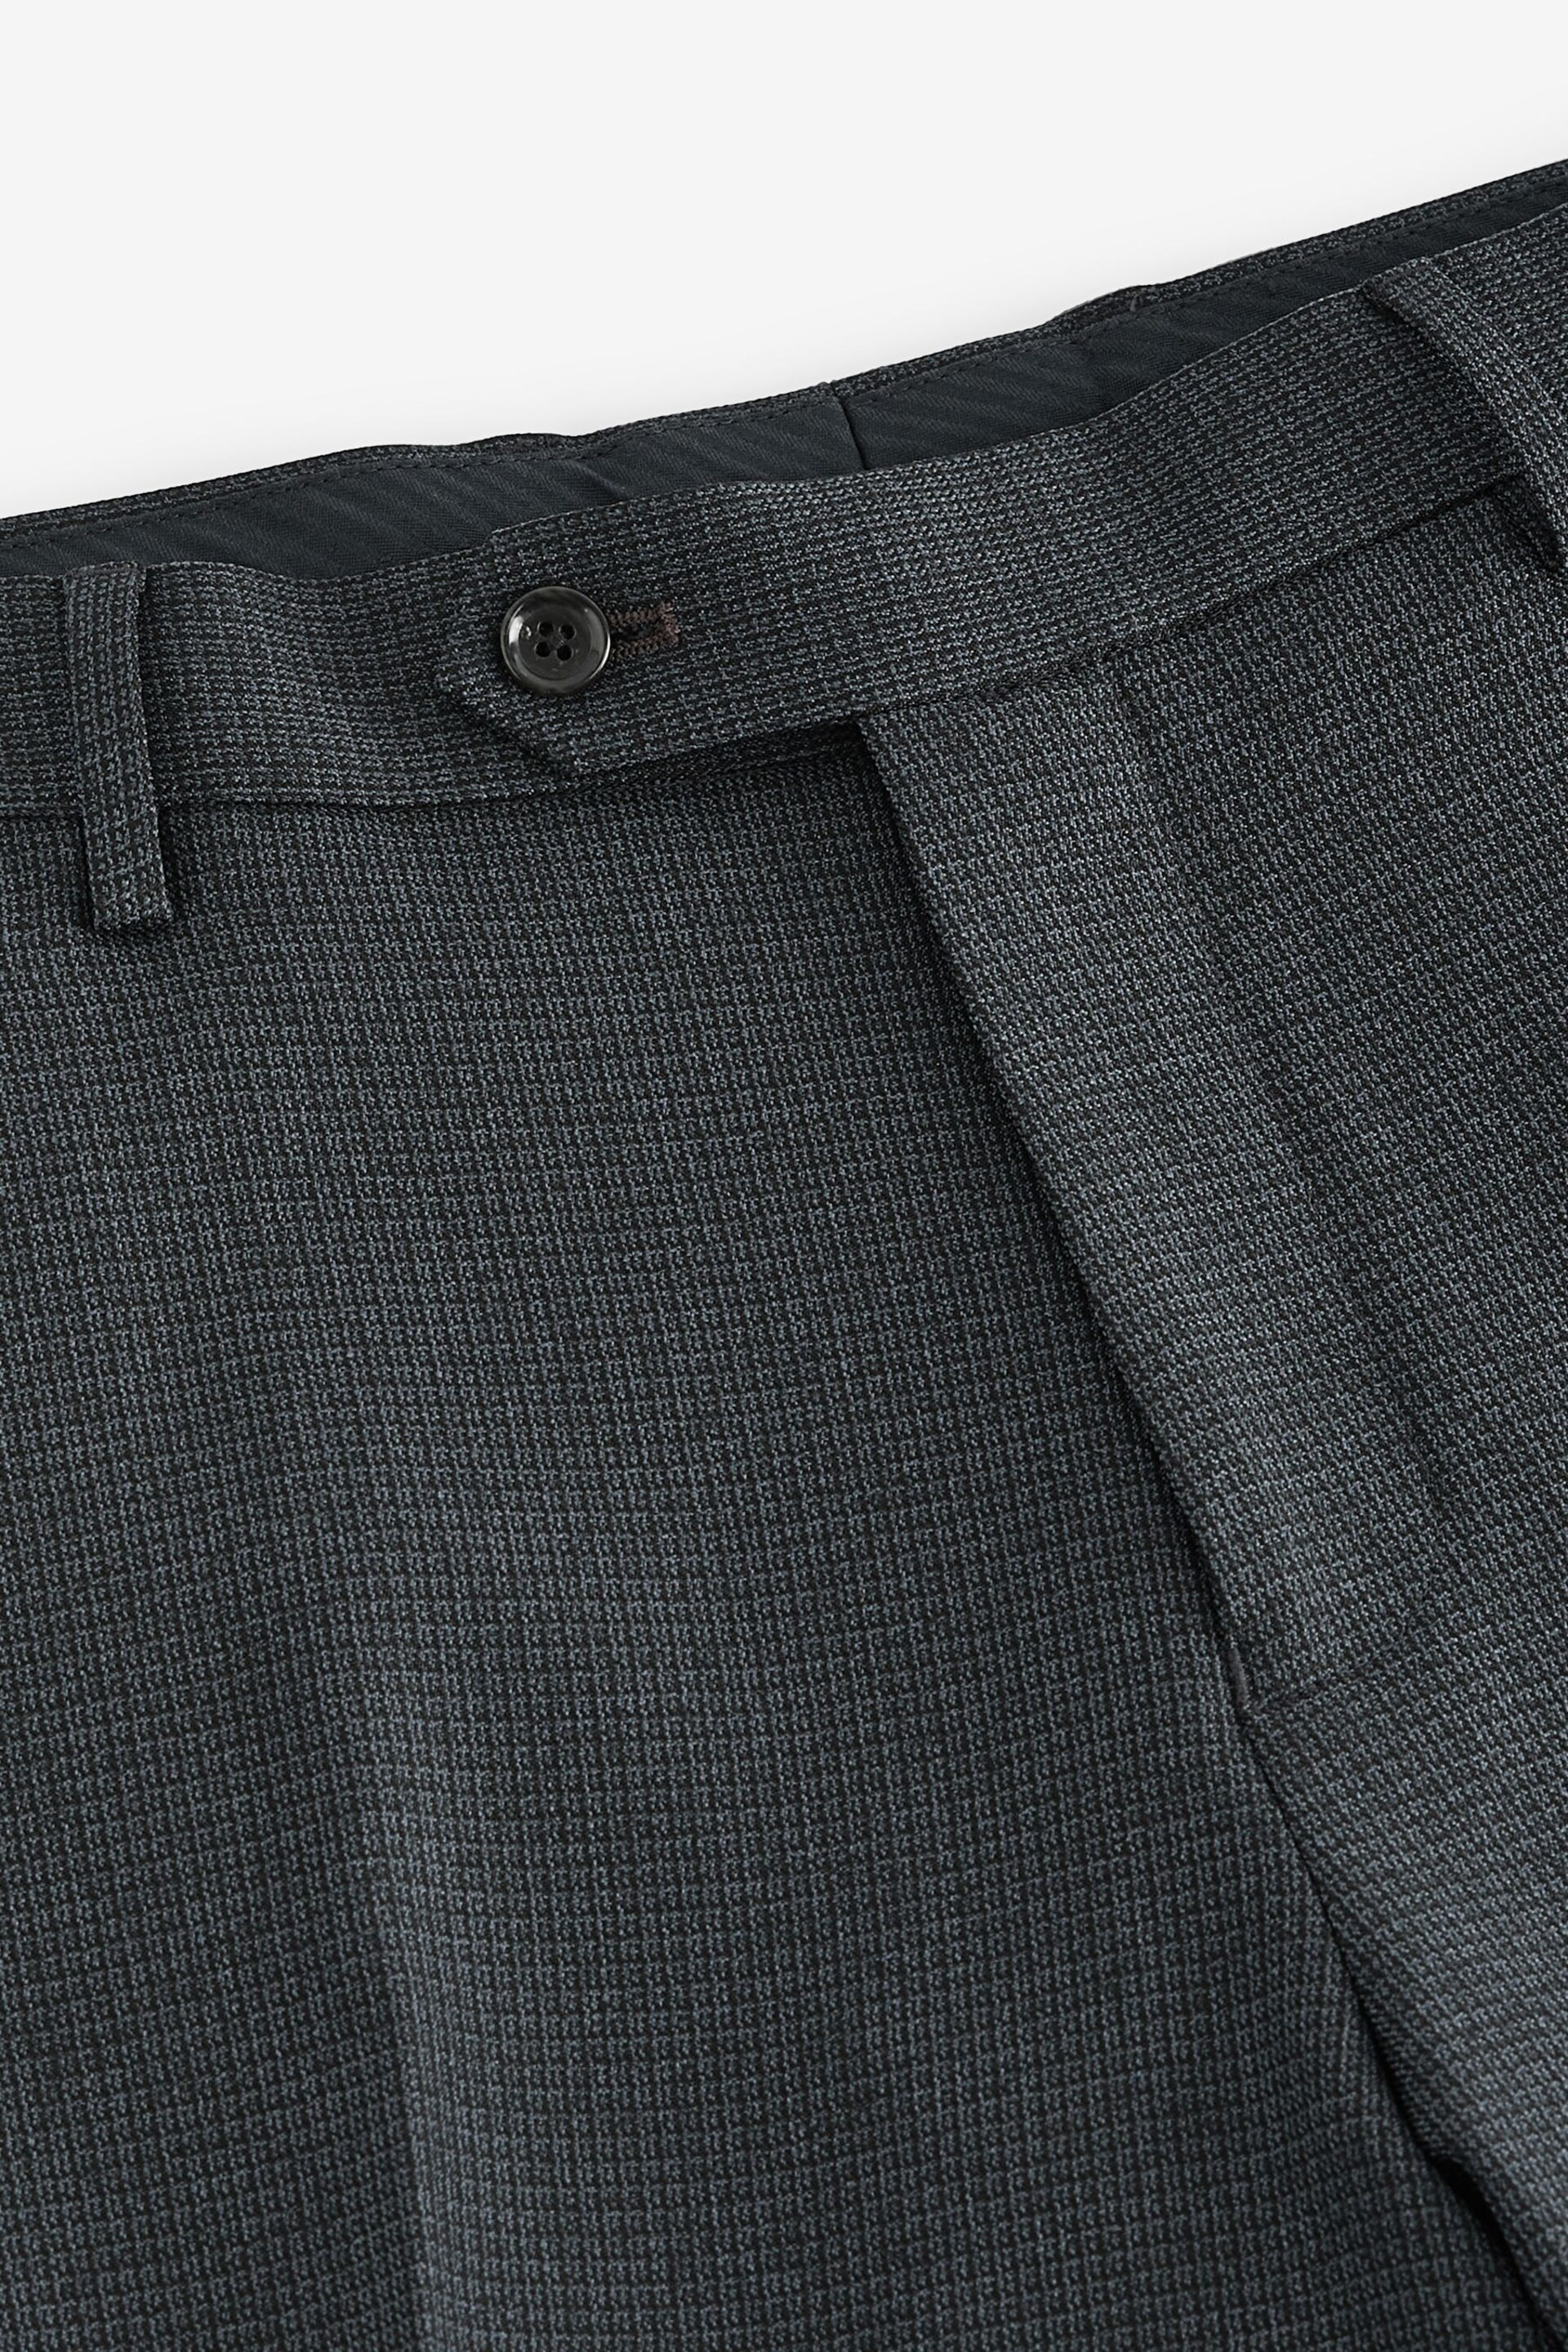 Navy Trimmed Textured Suit Trousers - Image 7 of 9